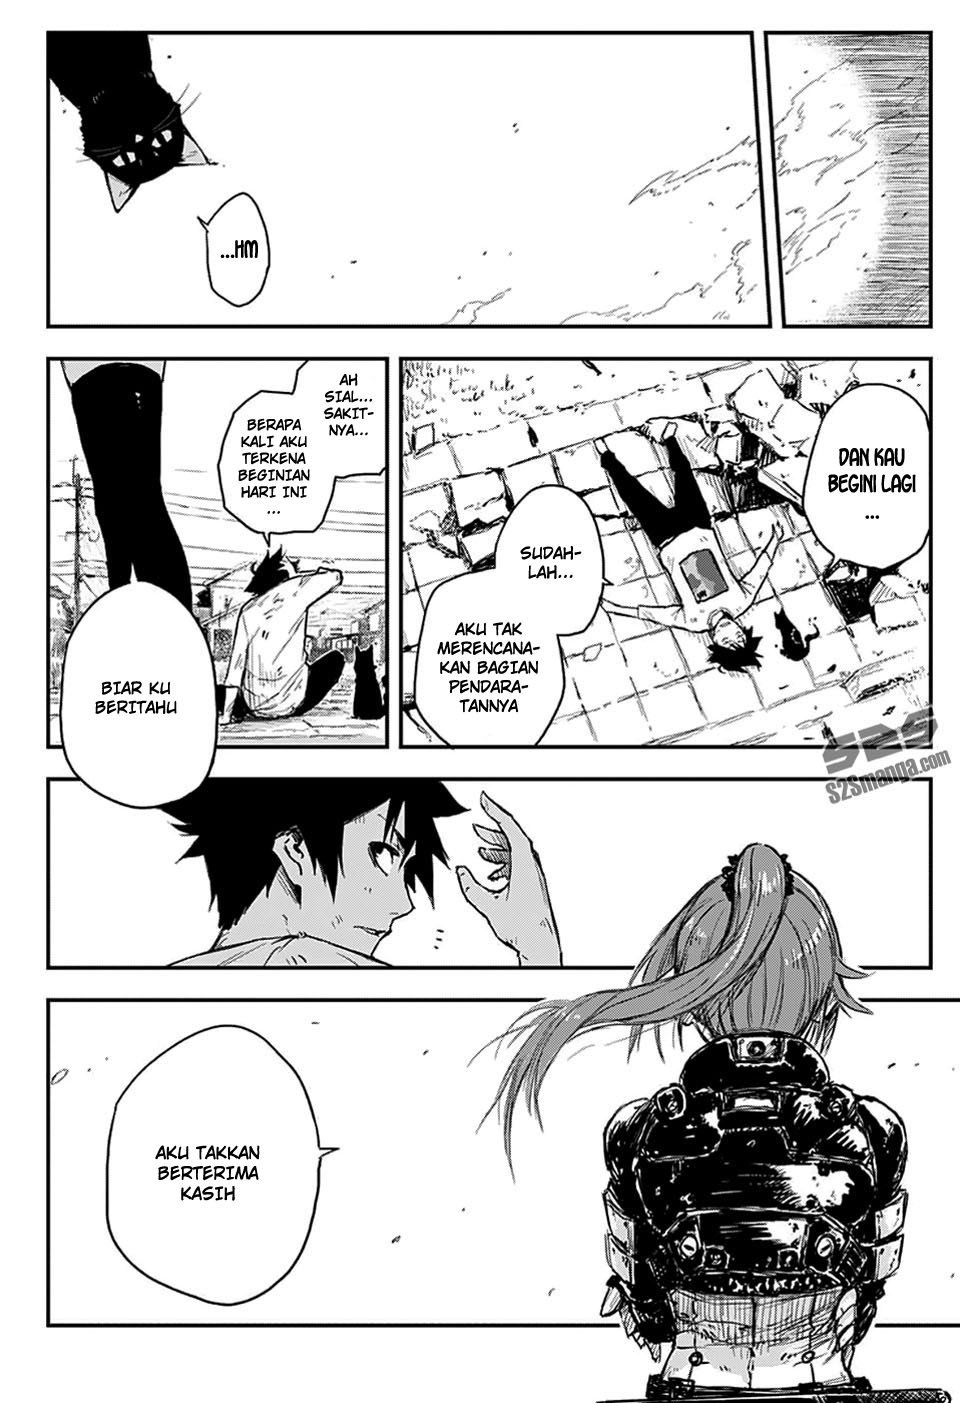 Black Torch Chapter 03